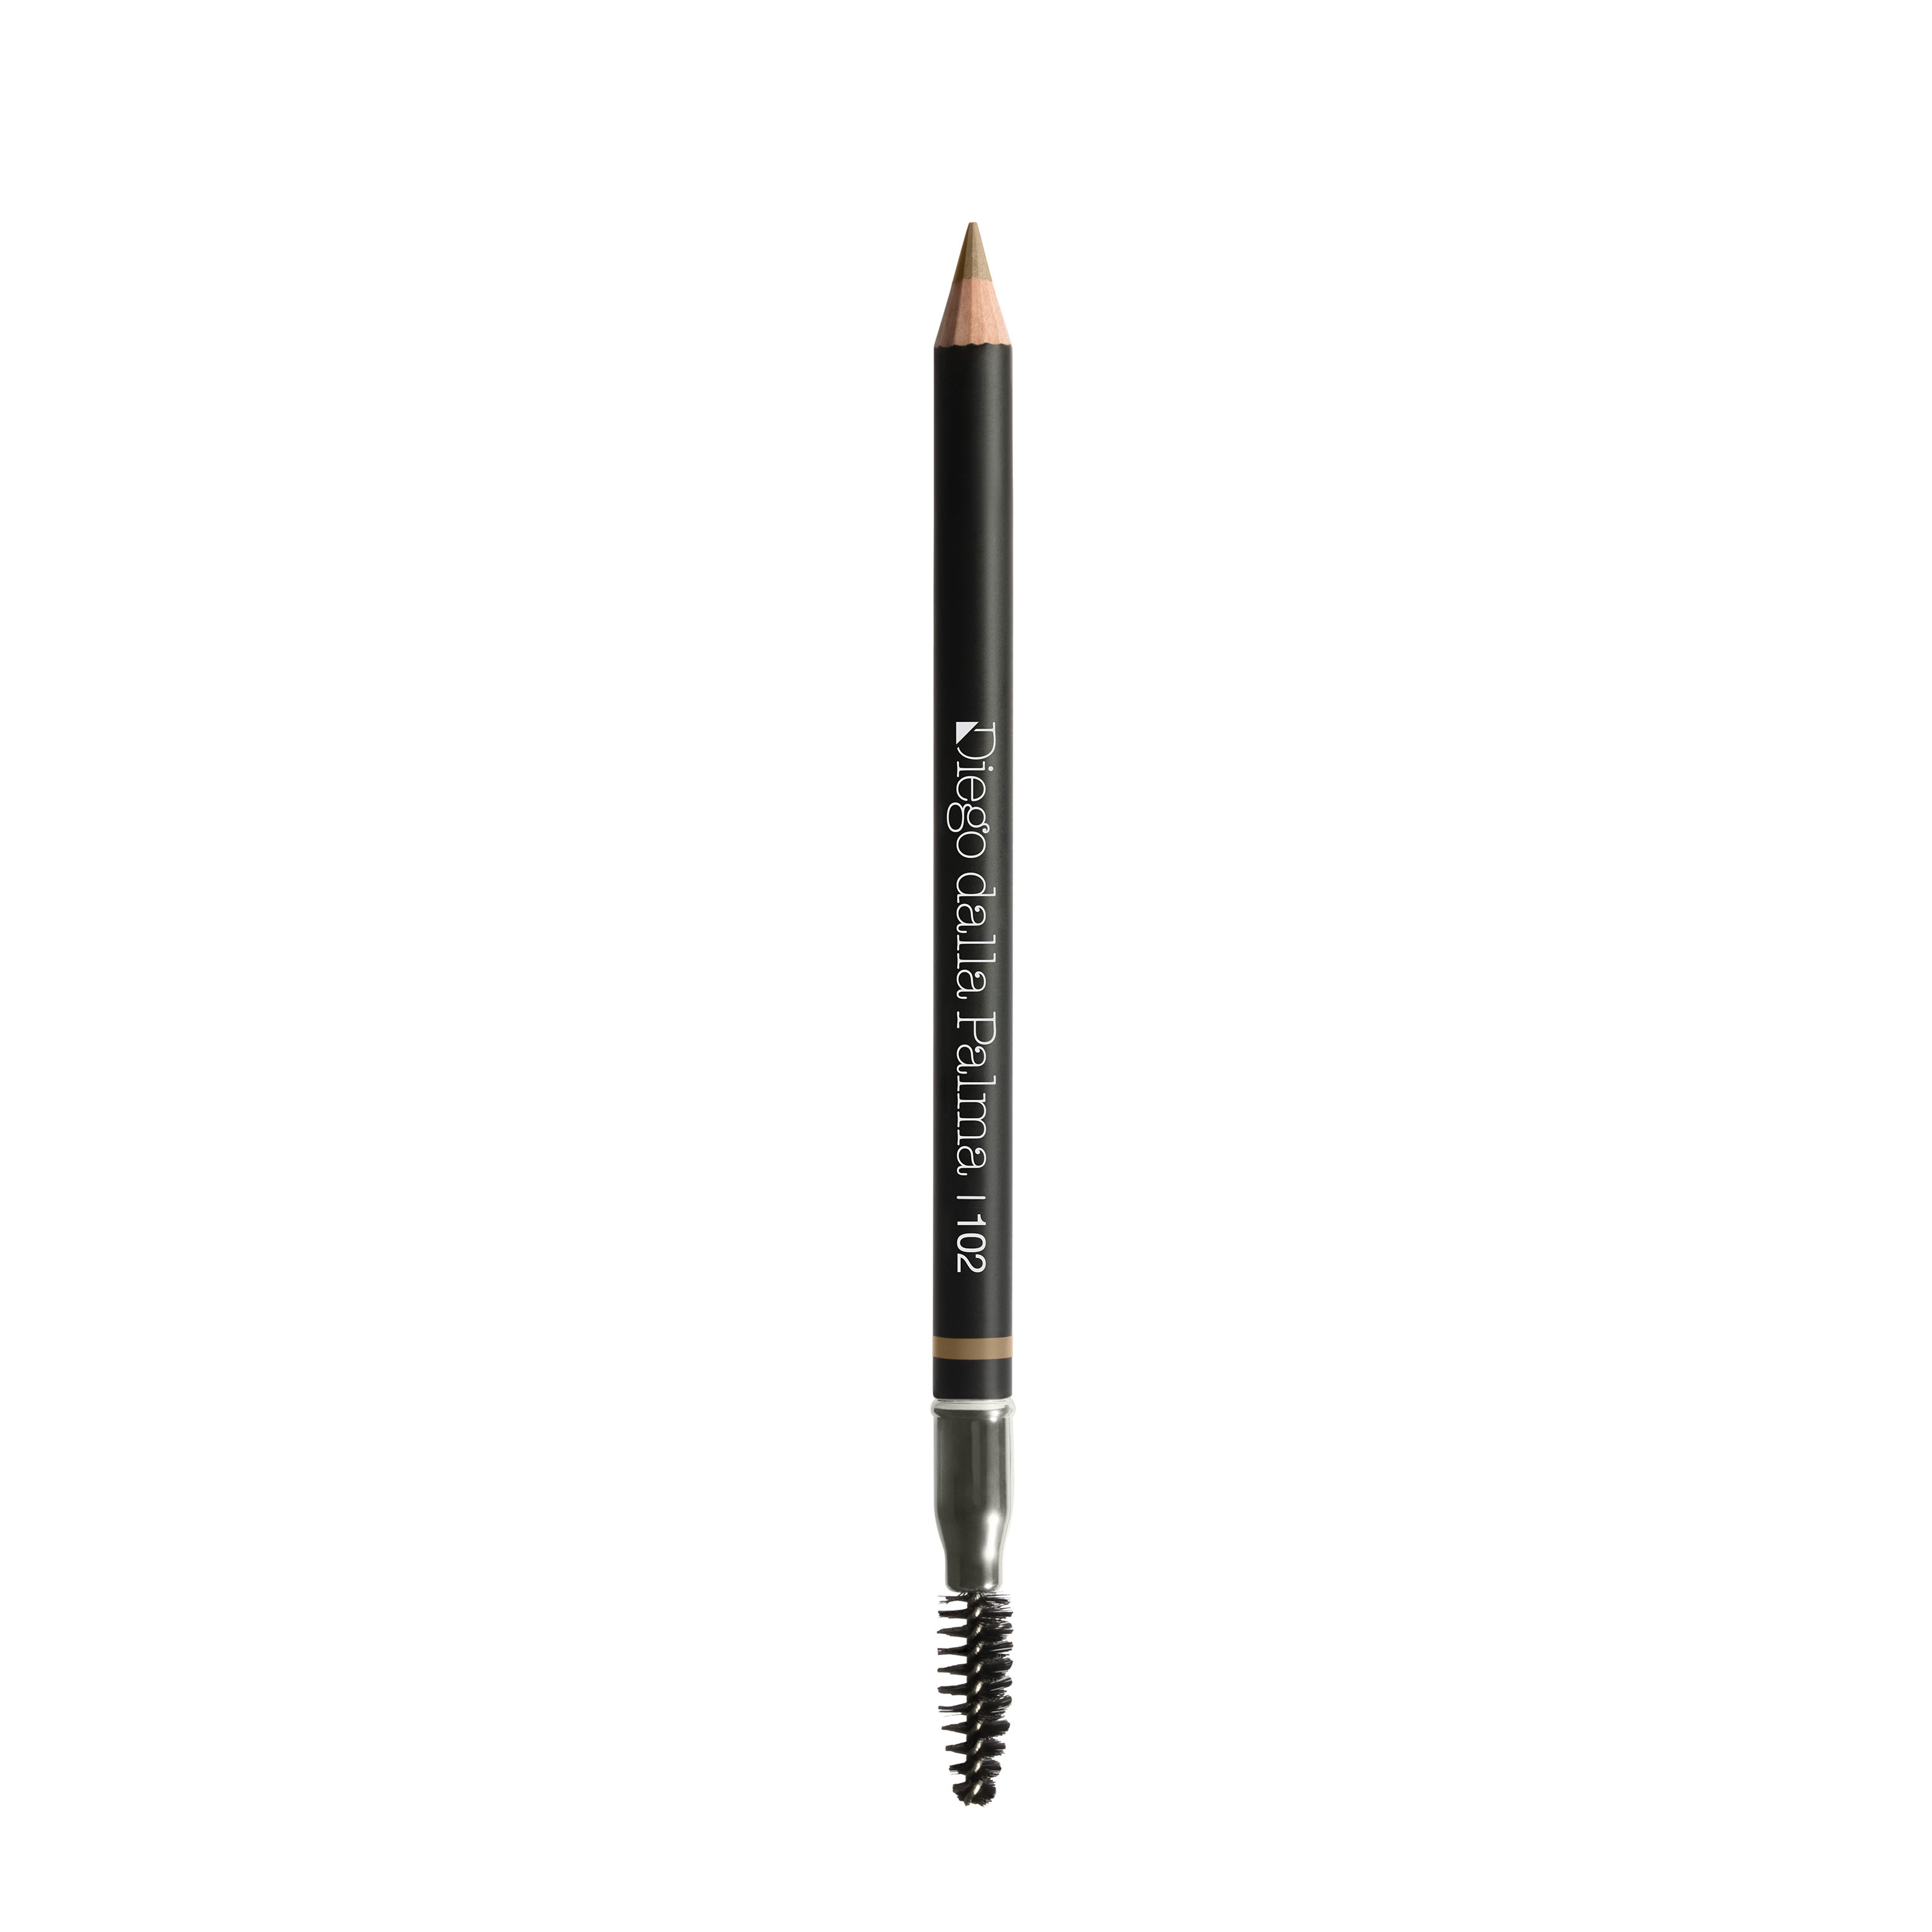 Waterproof Eyebrow Pencil - 102 warm taupe, Taupe Grey, large image number 0